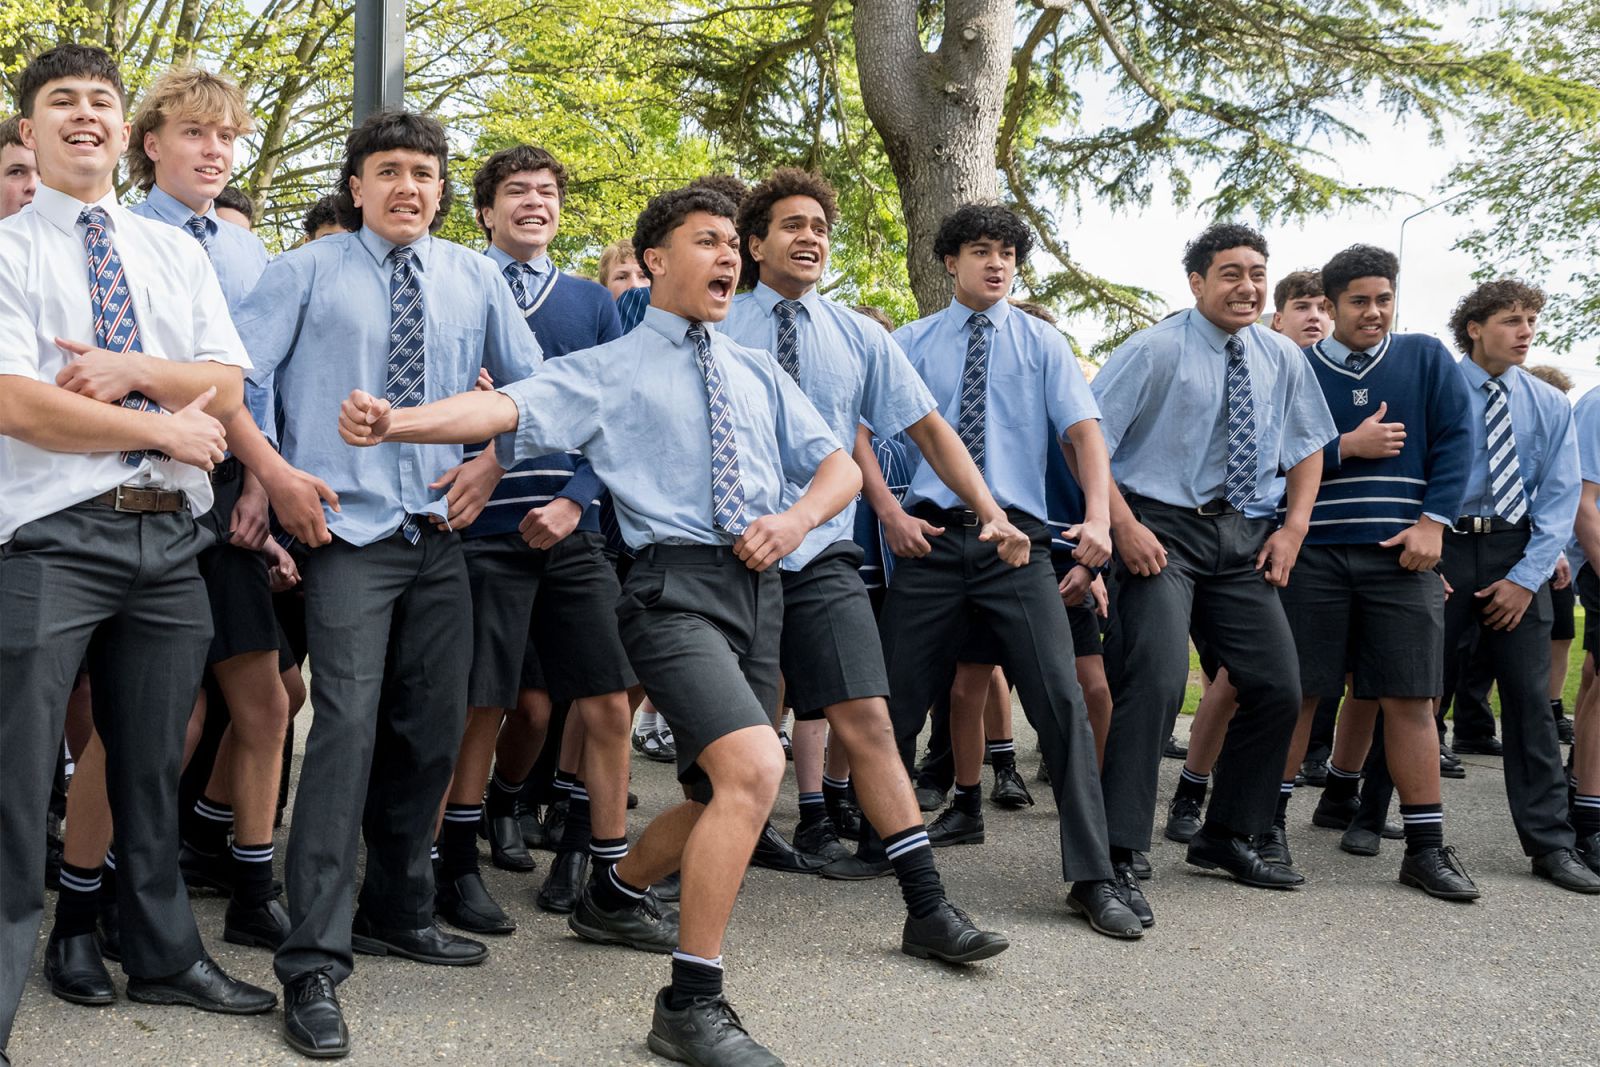 Middle school students performing a haka